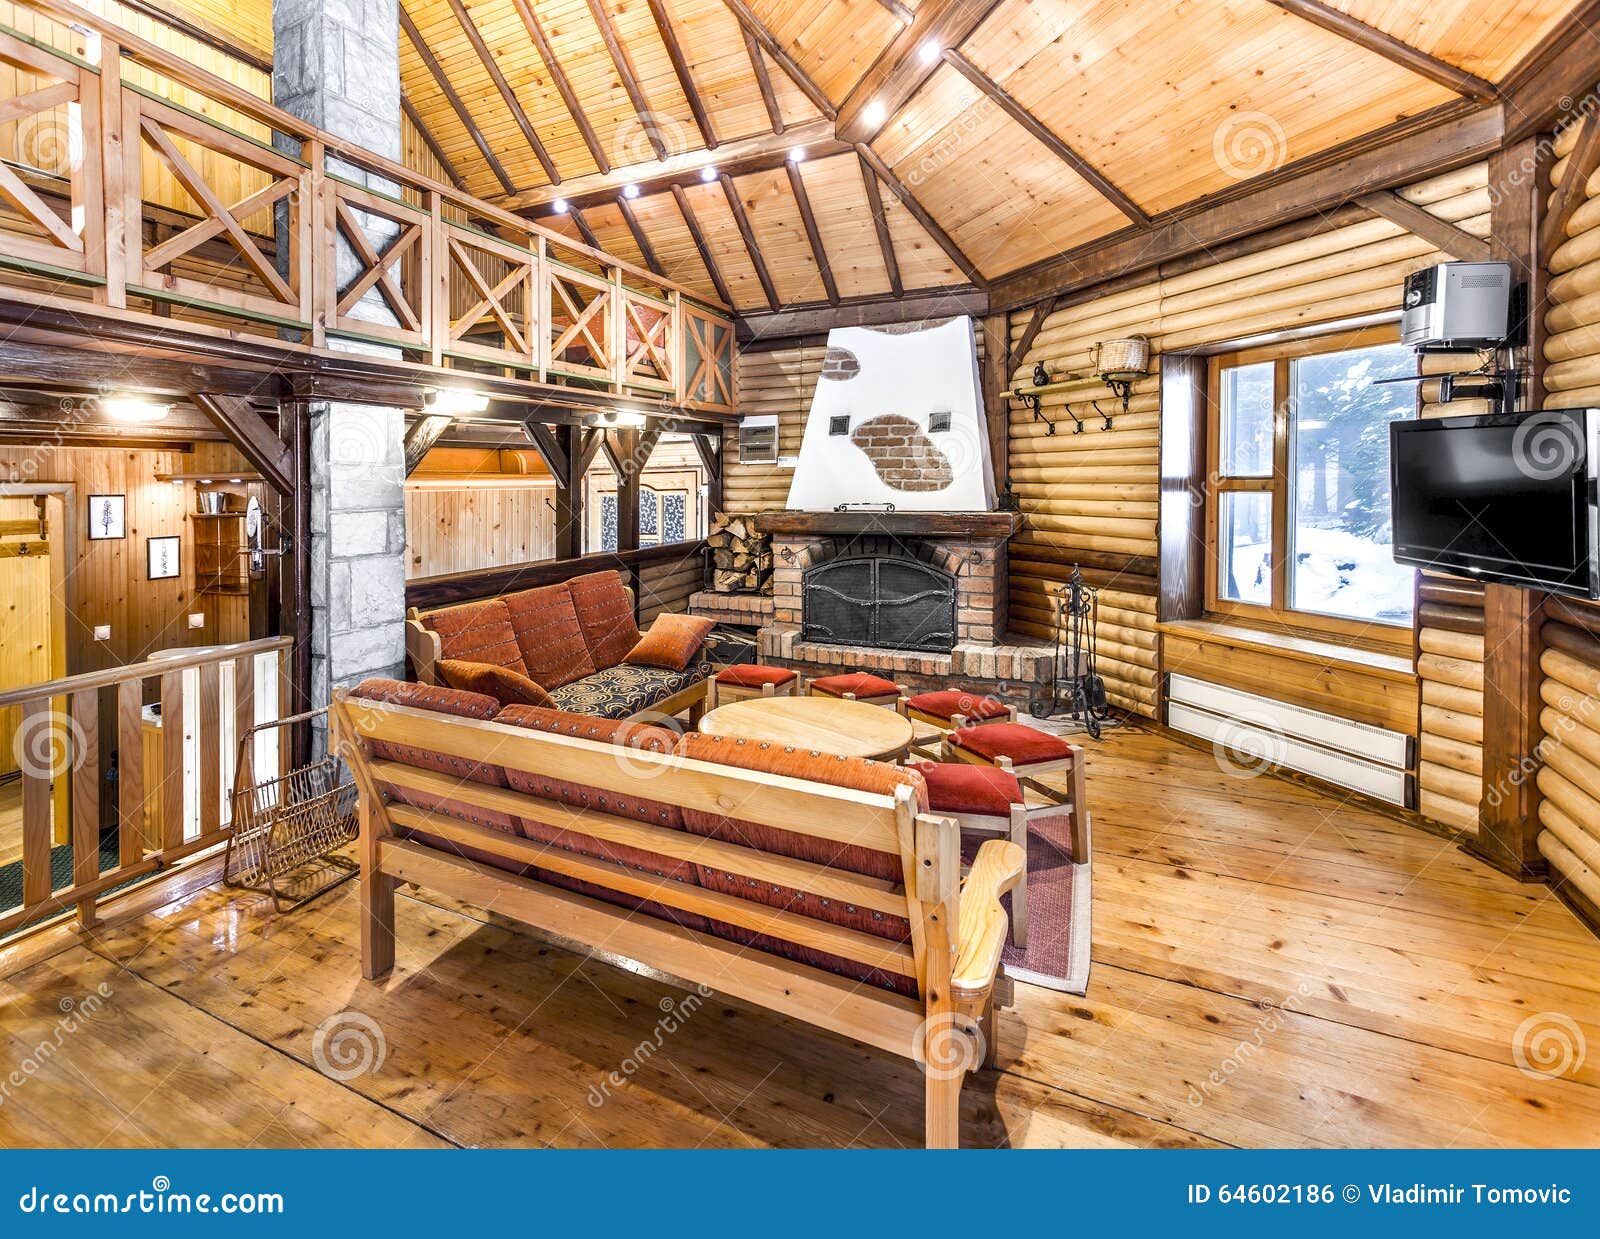 traditional wooden interior with table and fixtures - mountain resort